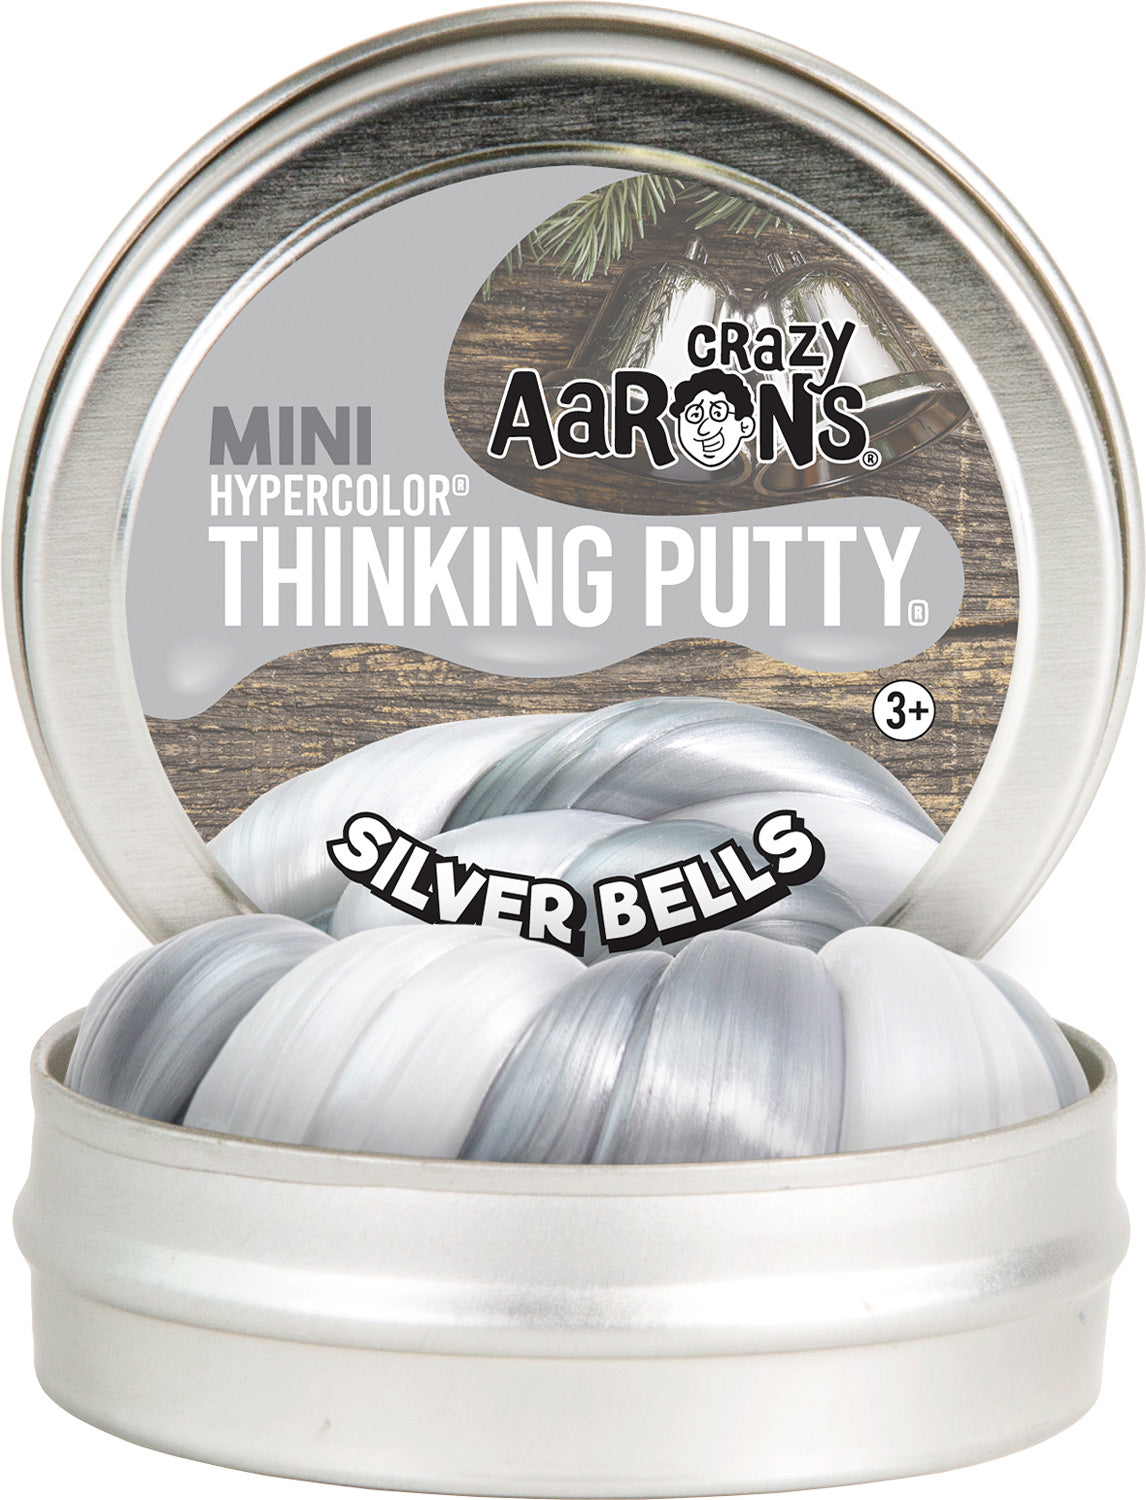 Silver Bells 2" Hypercolor Thinking Putty